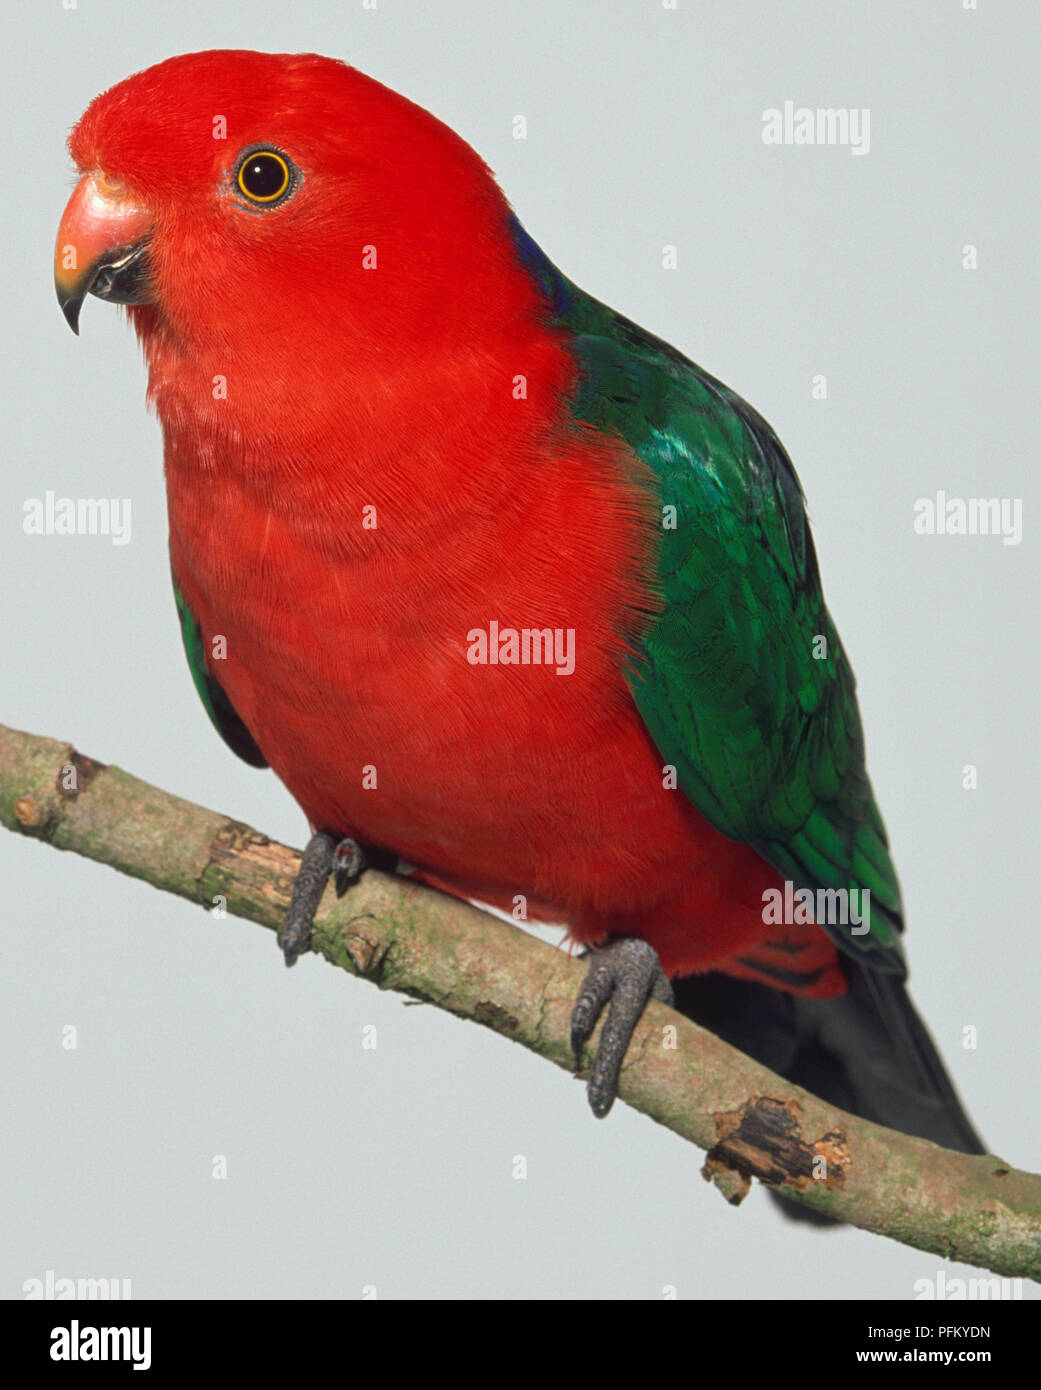 Side view of an Australian King Parrot with head in profile, perching on a branch showing the upper red mandible with black tip and the lower black mandible, red neck and head with a narrow blue band on the nape, green back and wing feathers. Stock Photo